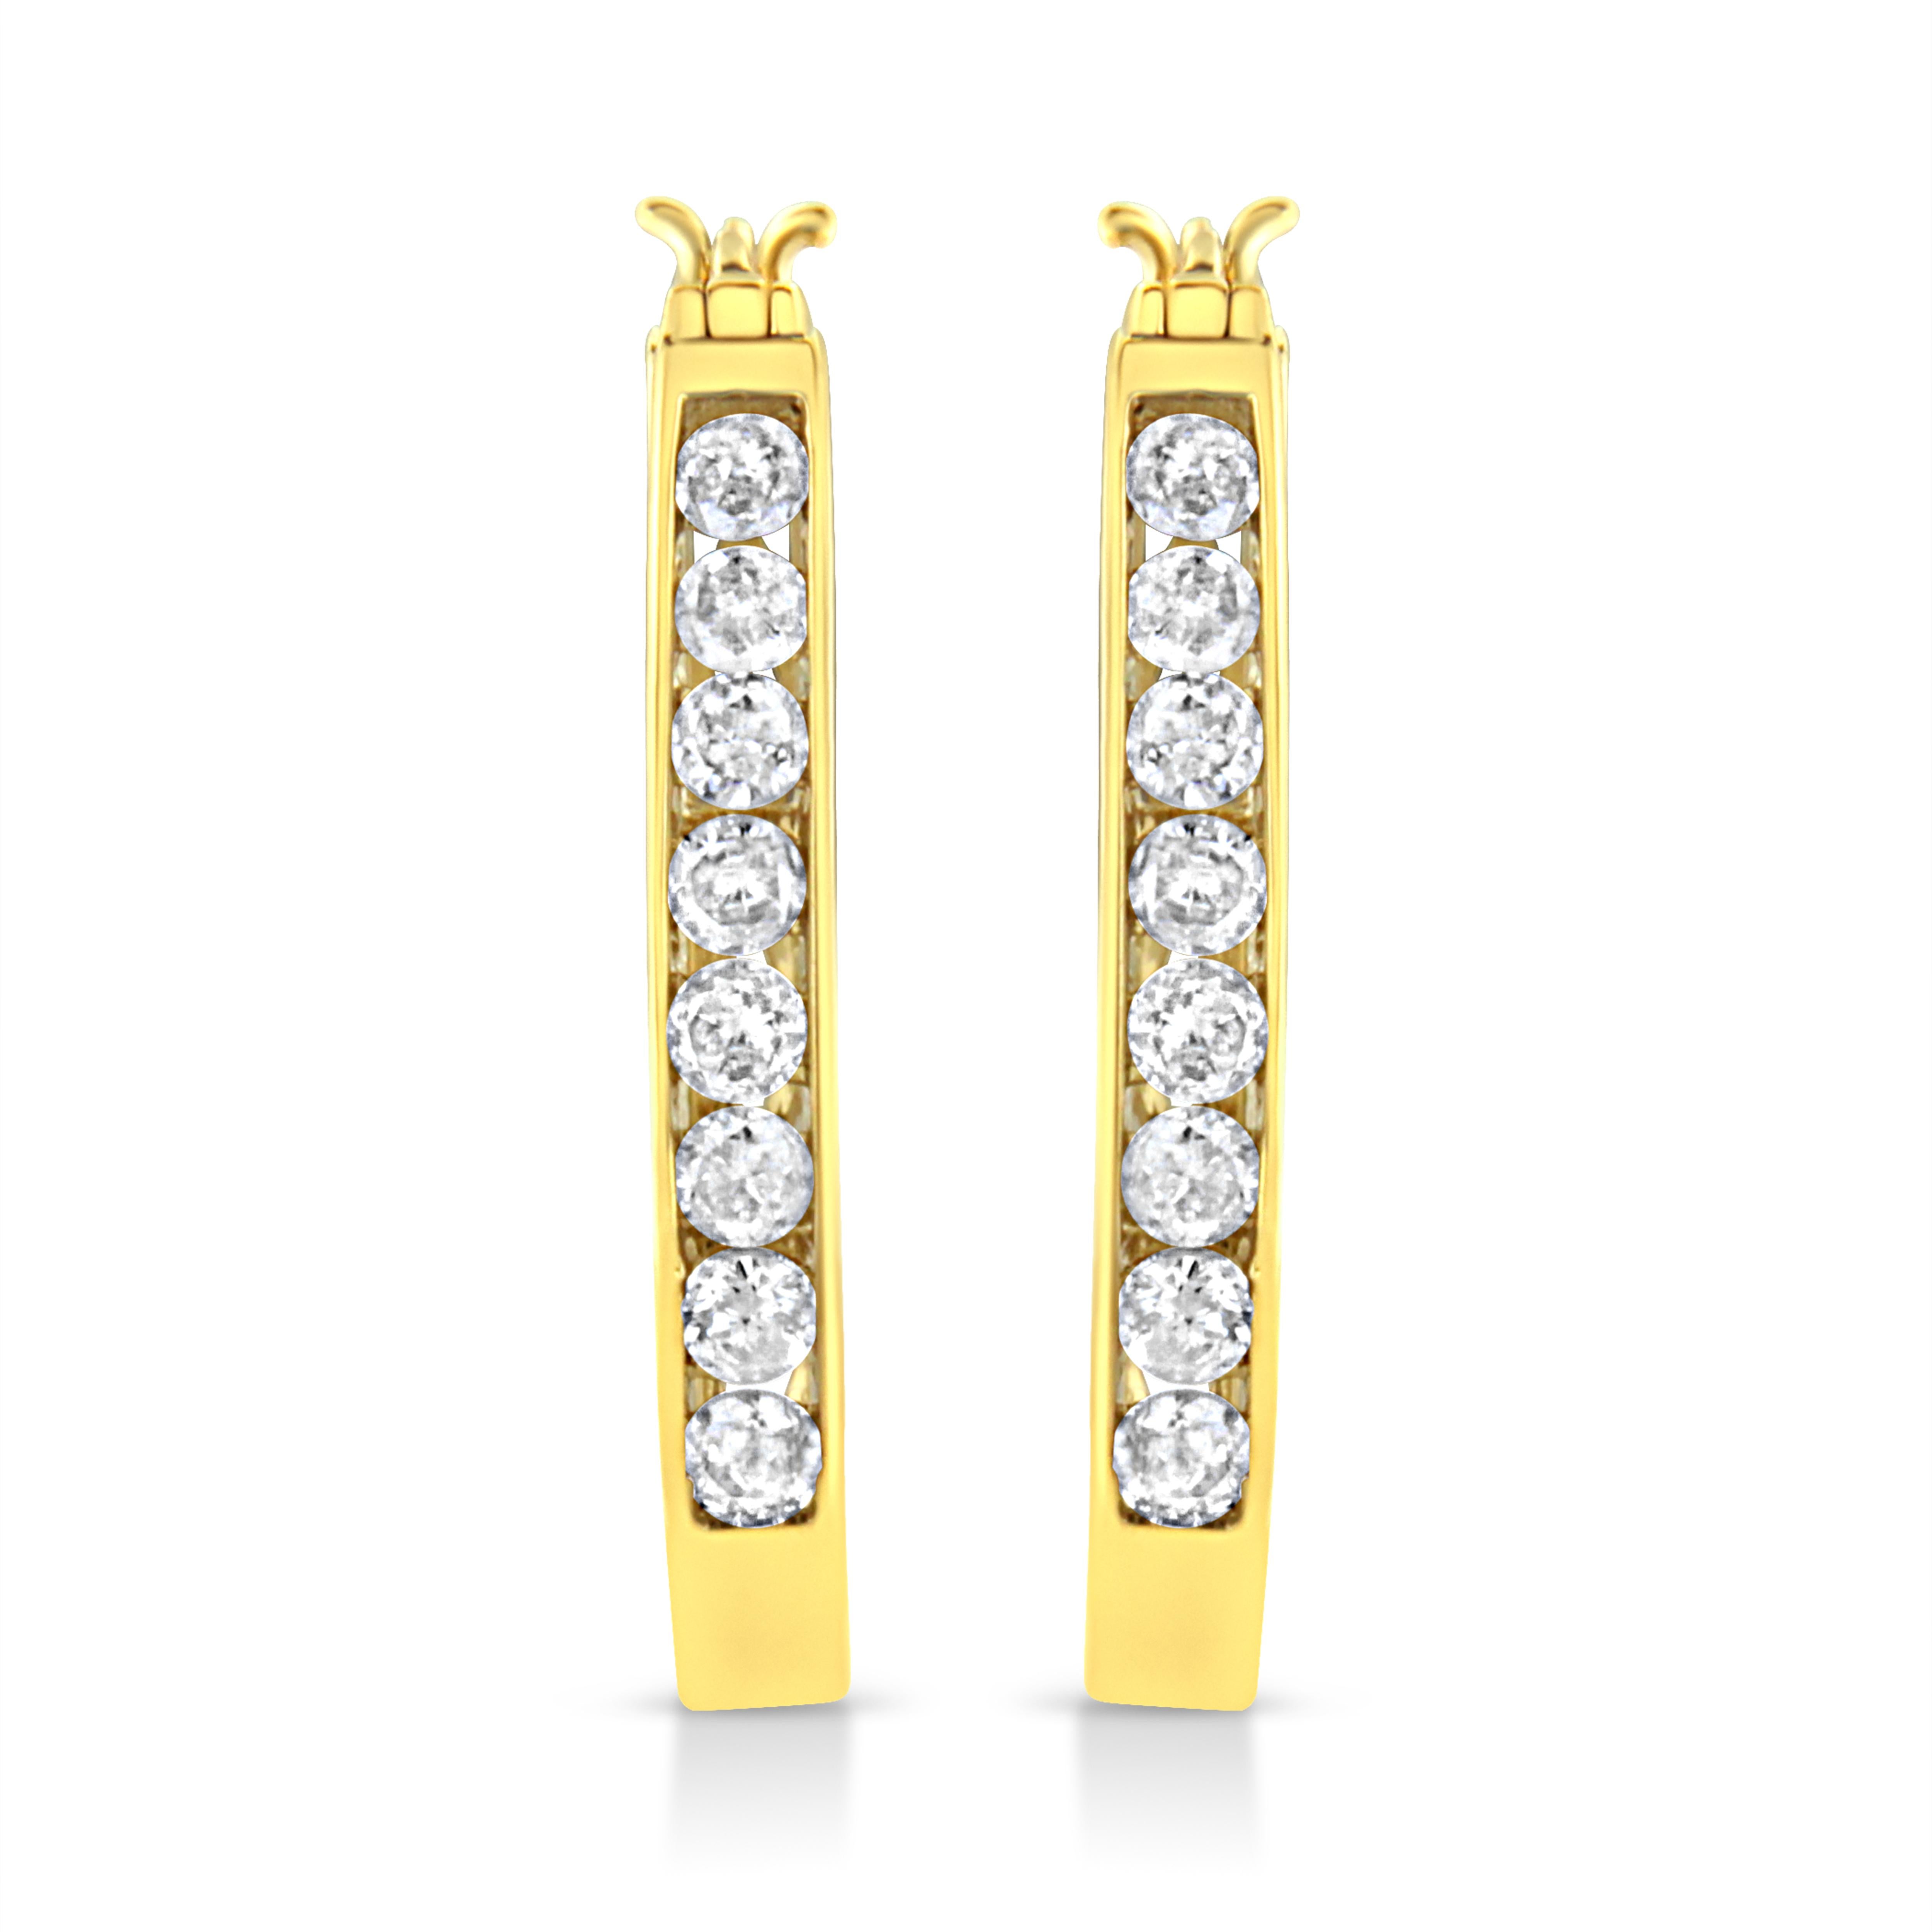 You will fall in love with these unique hoop earrings. A must have for any serious jewelry collection, these .925 sterling silver earrings boast an impressive 1 carat total weight of diamonds with a whopping 16 individual stones. The hoops have